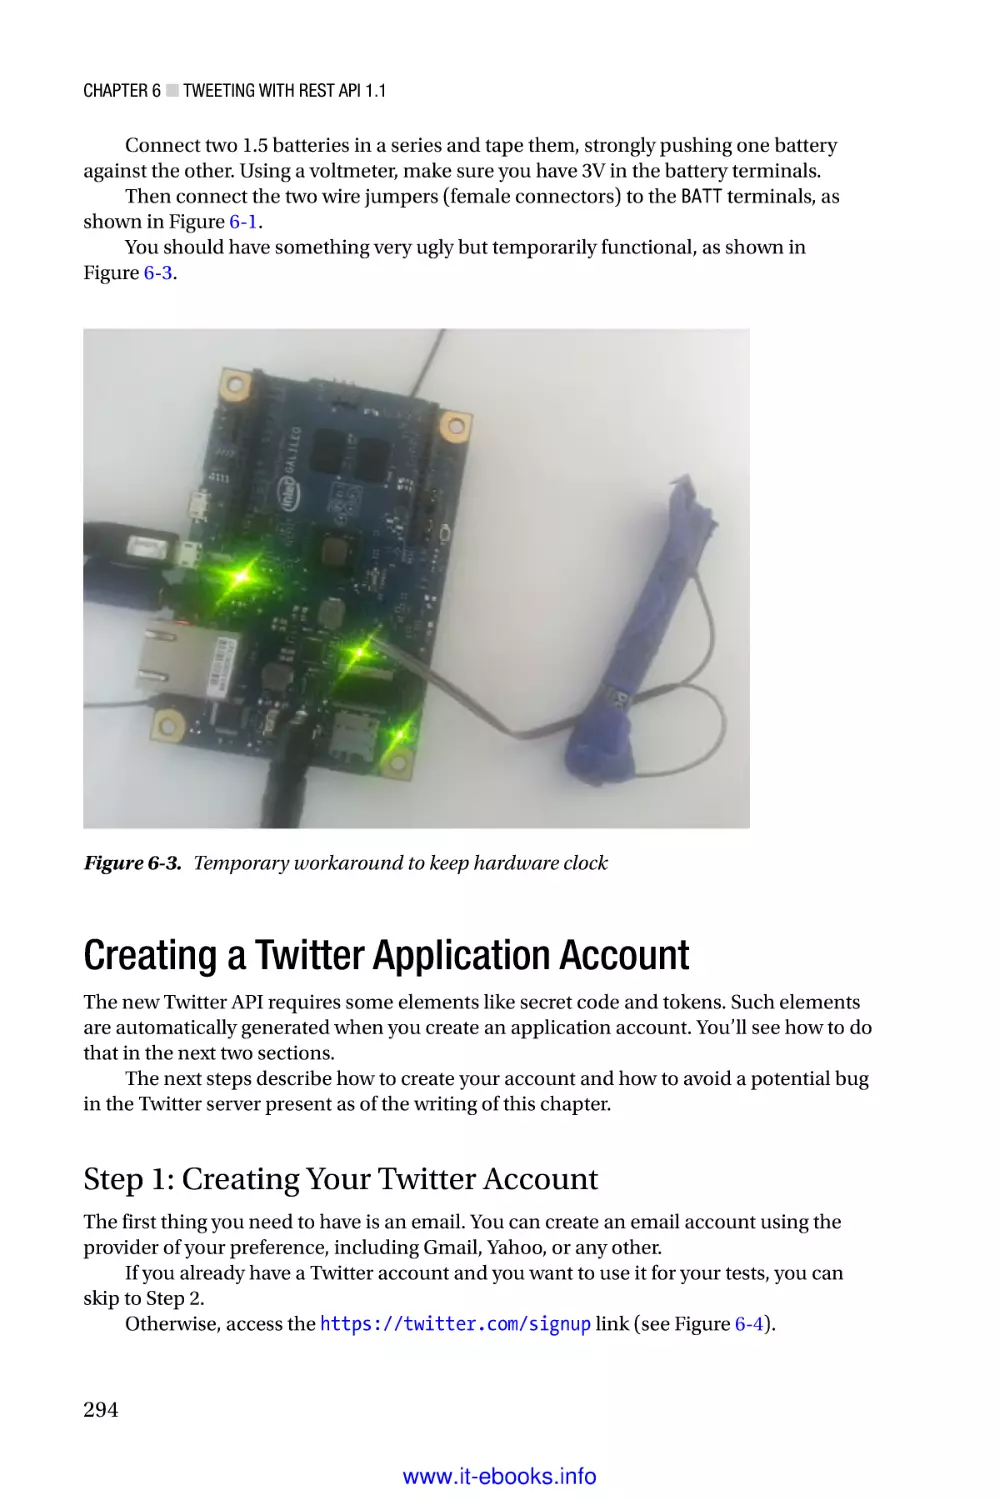 Creating a Twitter Application Account
Step 1